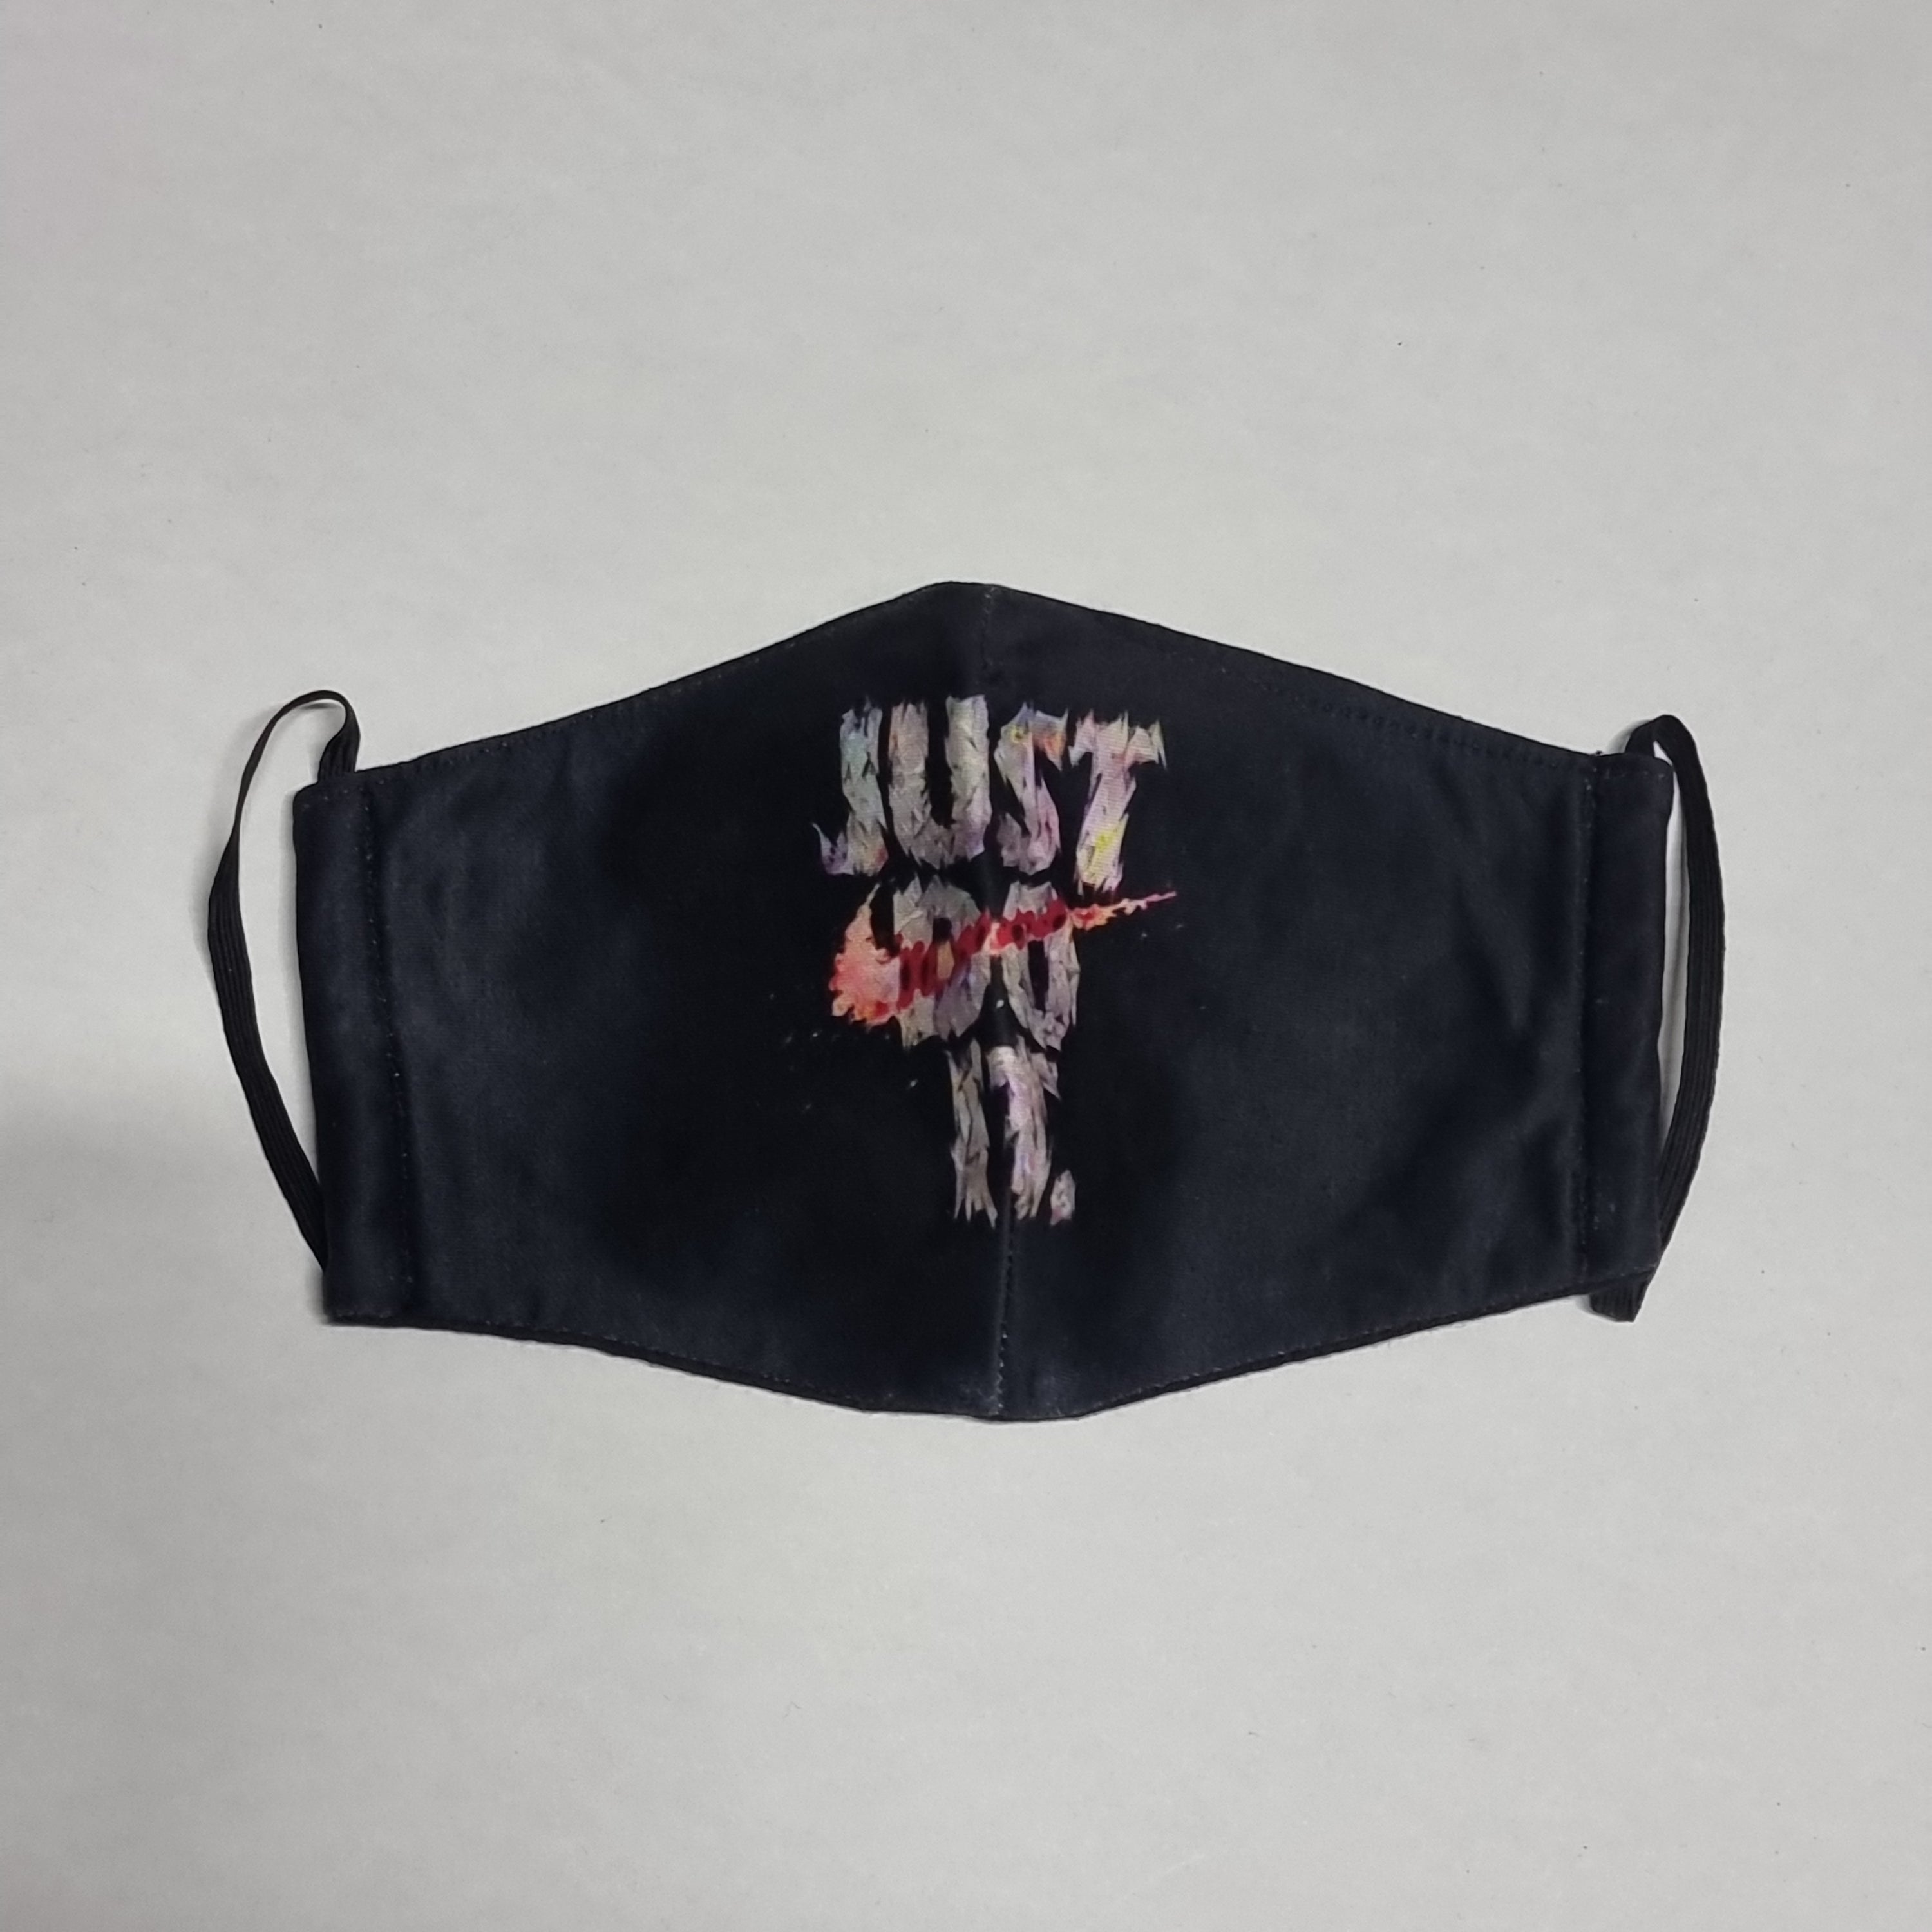 Just do it mask